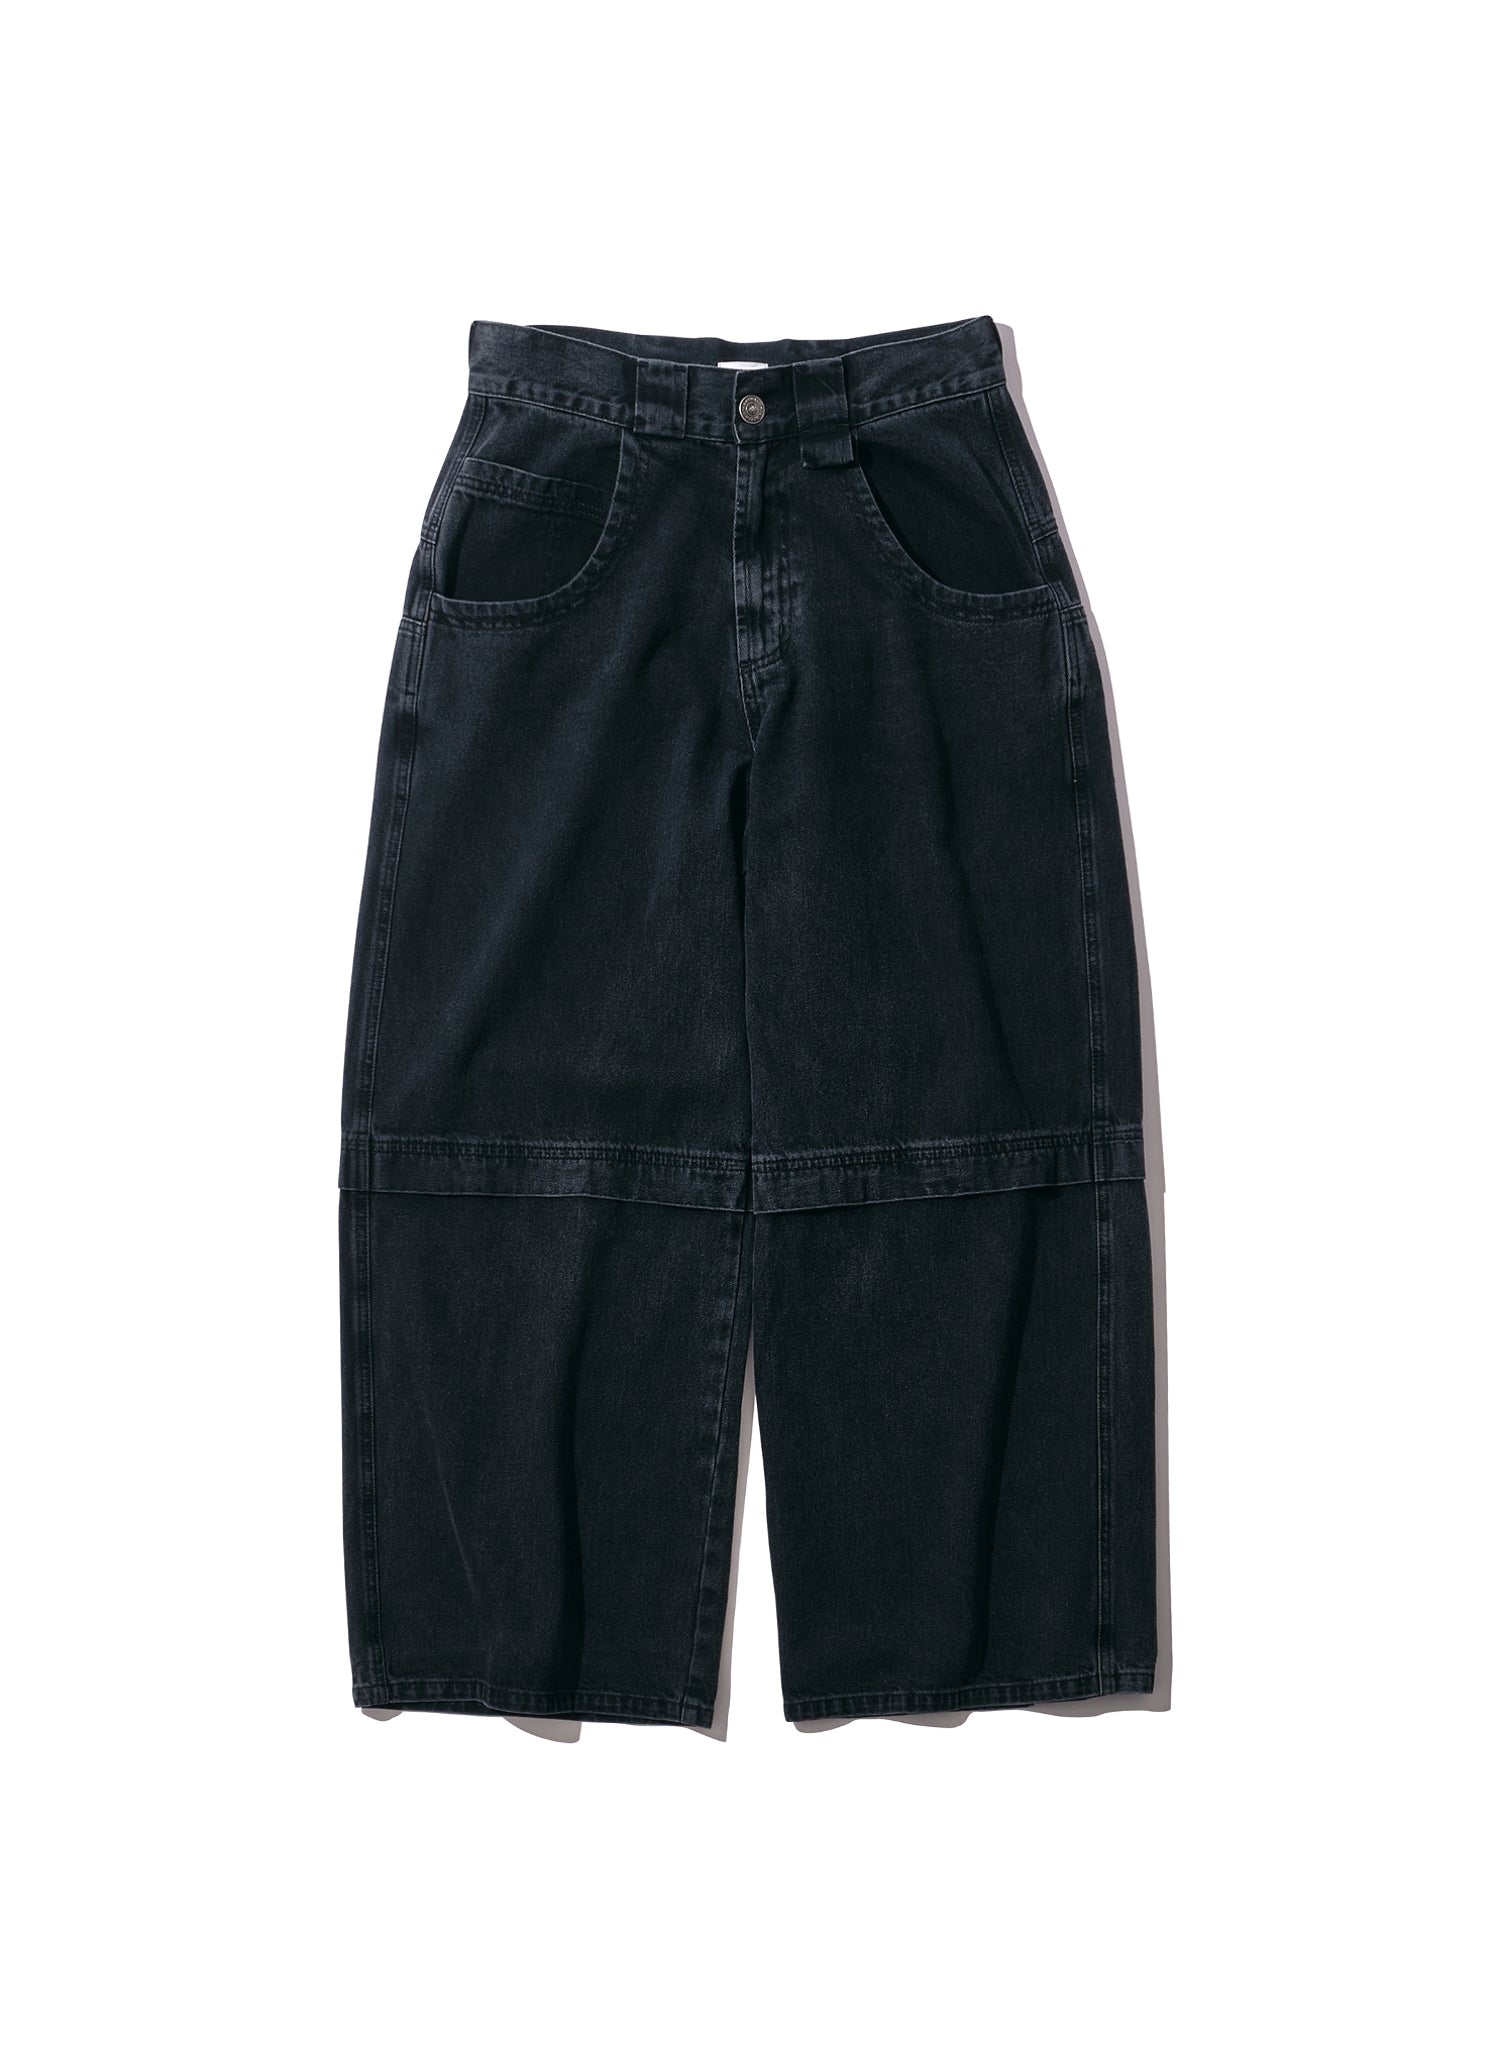 WILLY CHAVARRIA / DENIM LAYERED PANTS WASHED BLACK